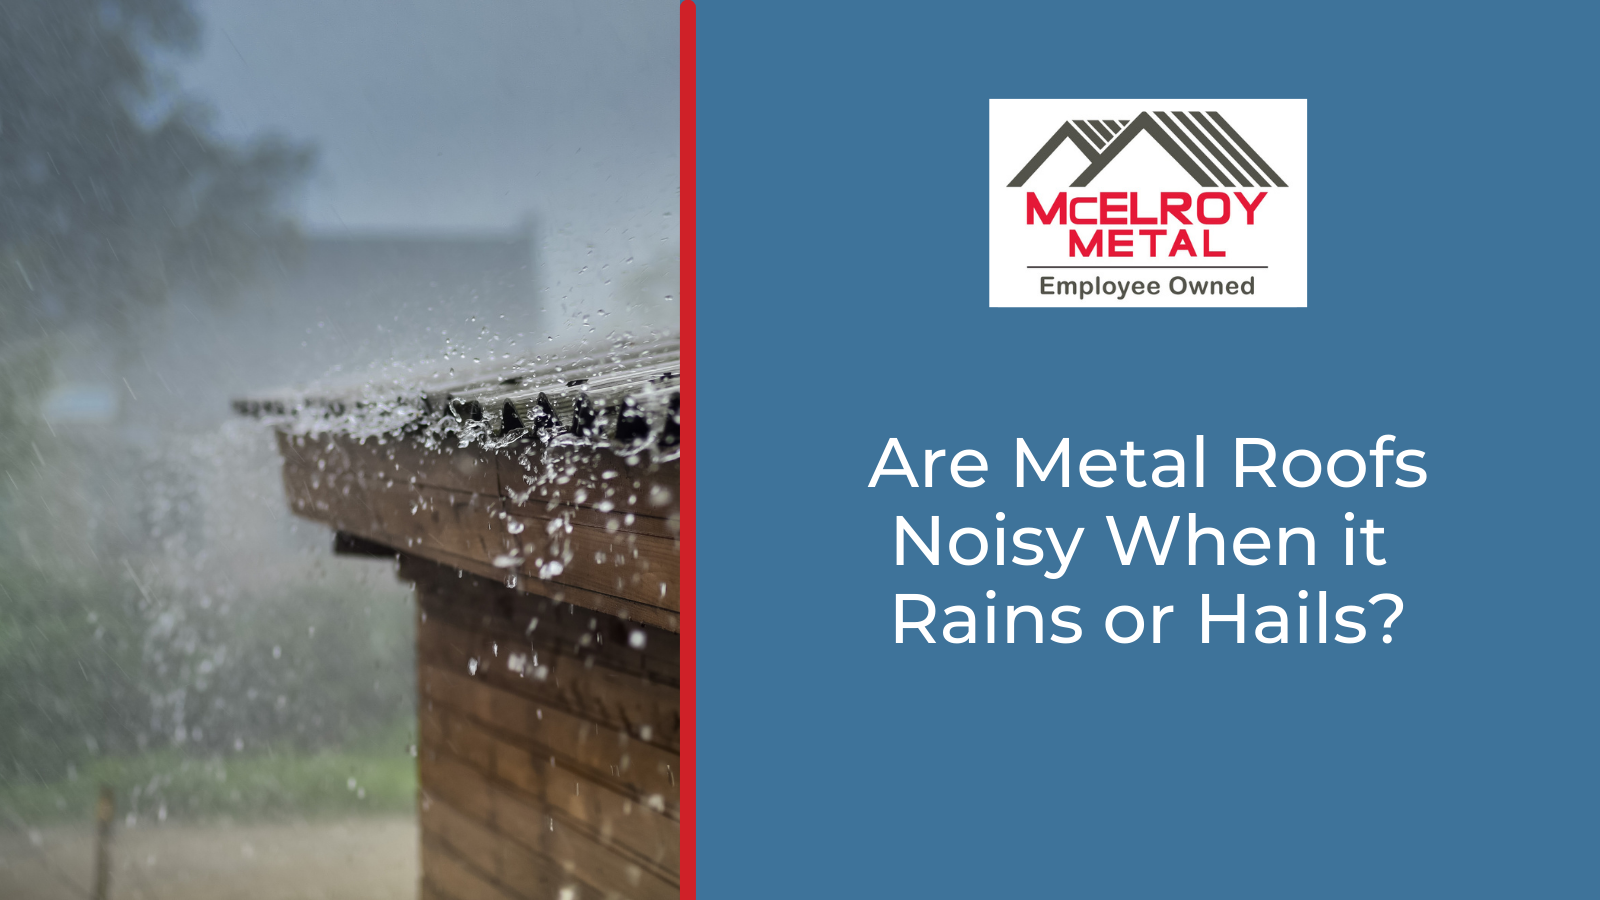 Are Metal Roofs Noisy When it Rains or Hails?